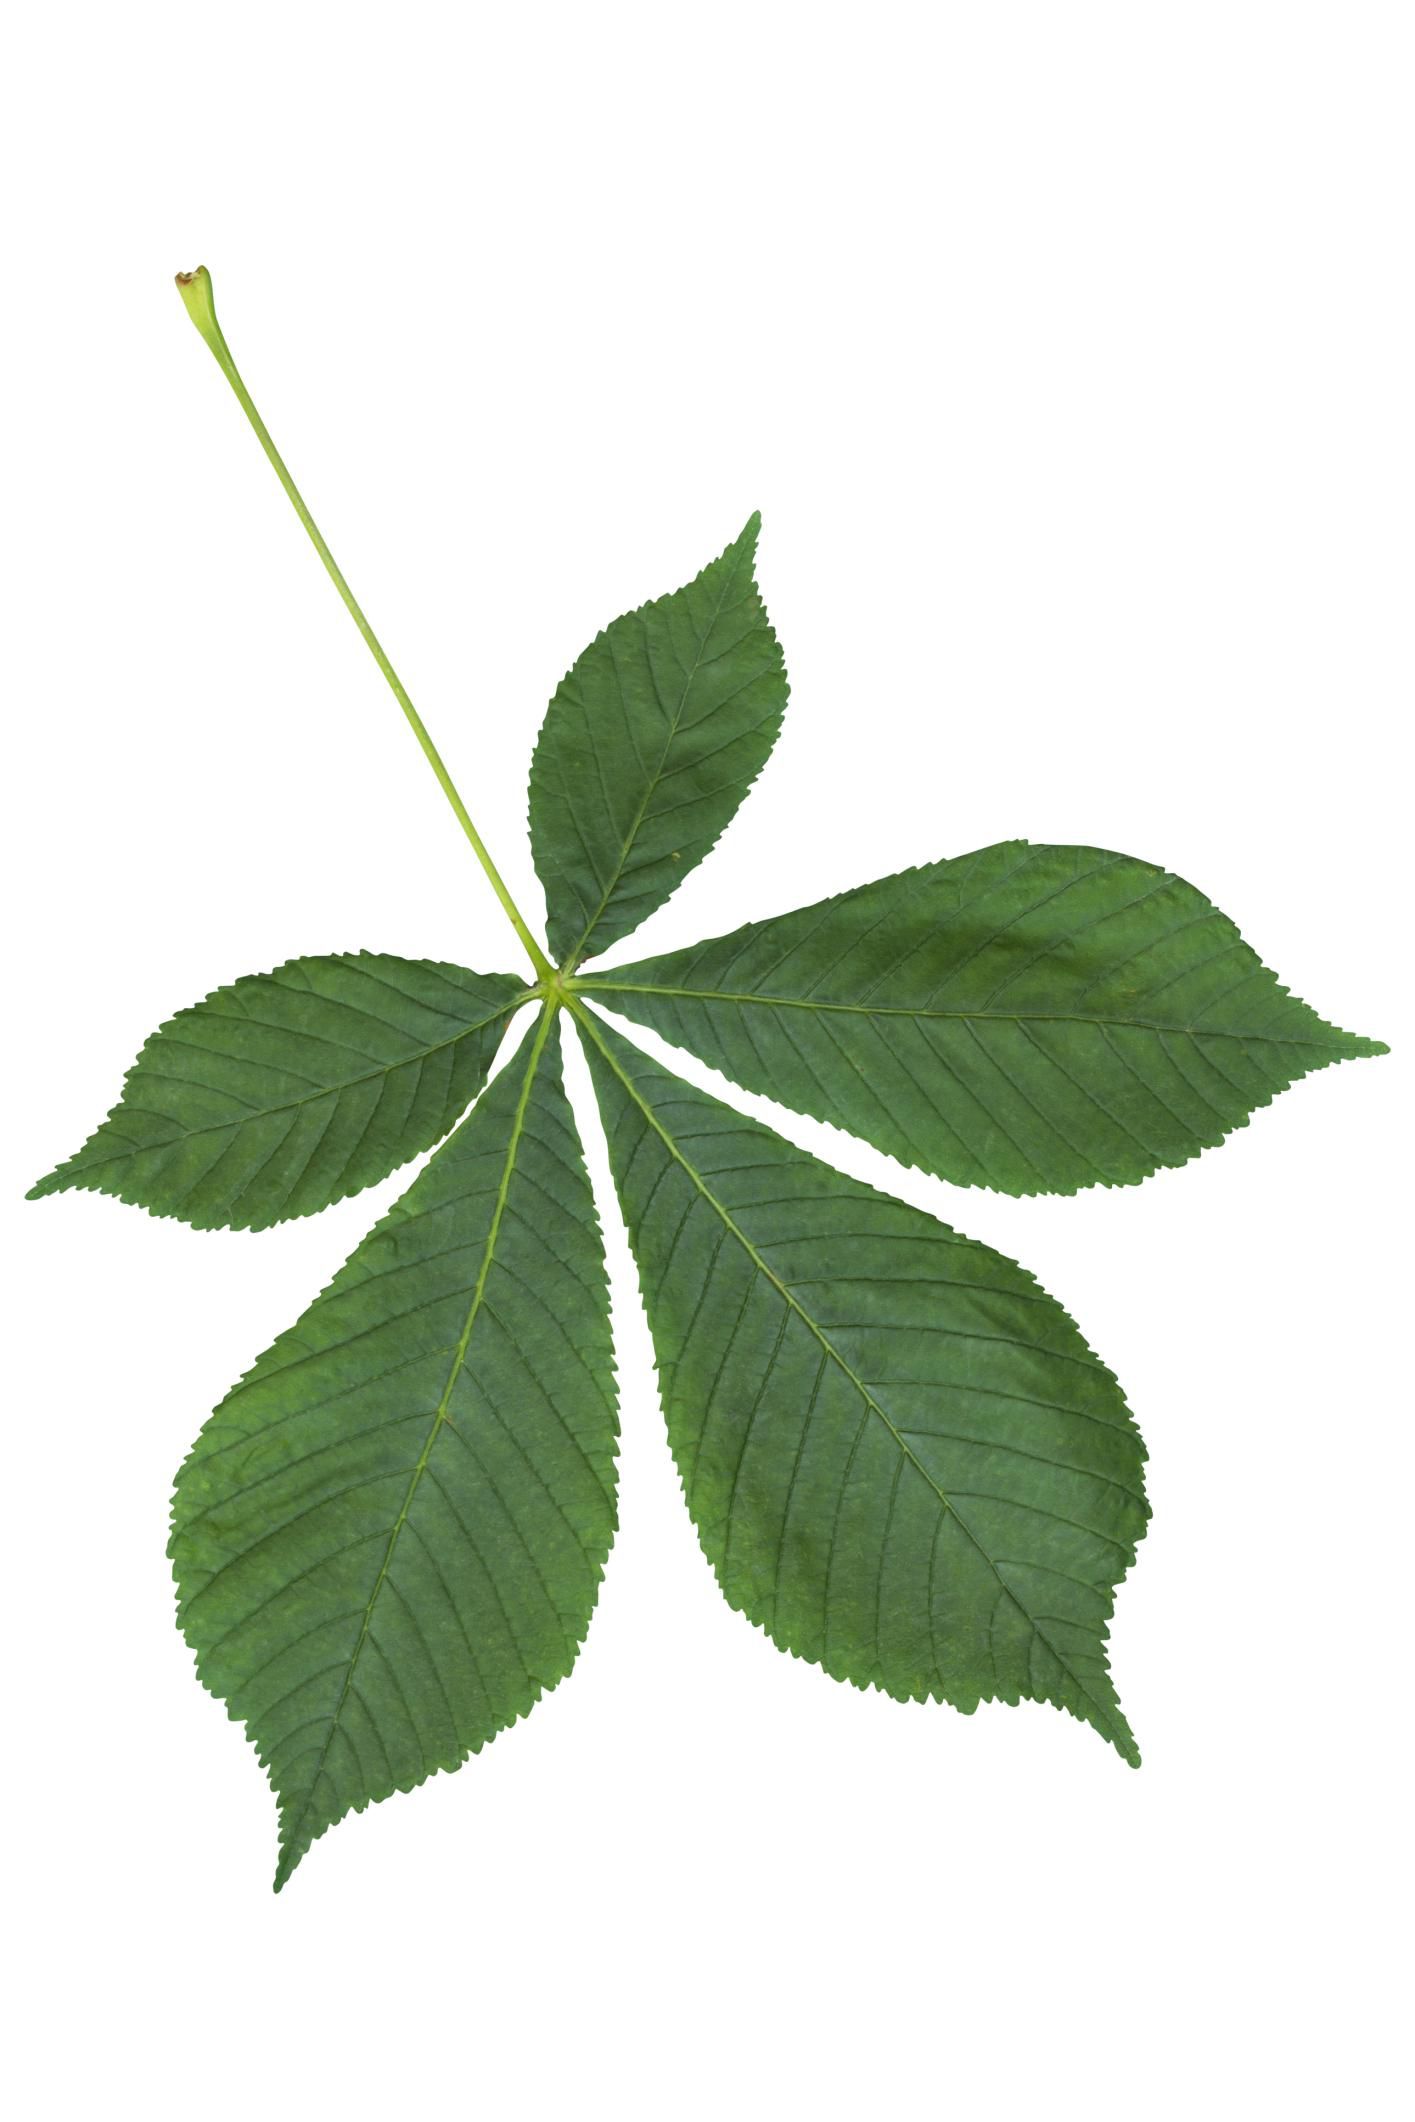 palmate-and-pinnate-compound-leaves